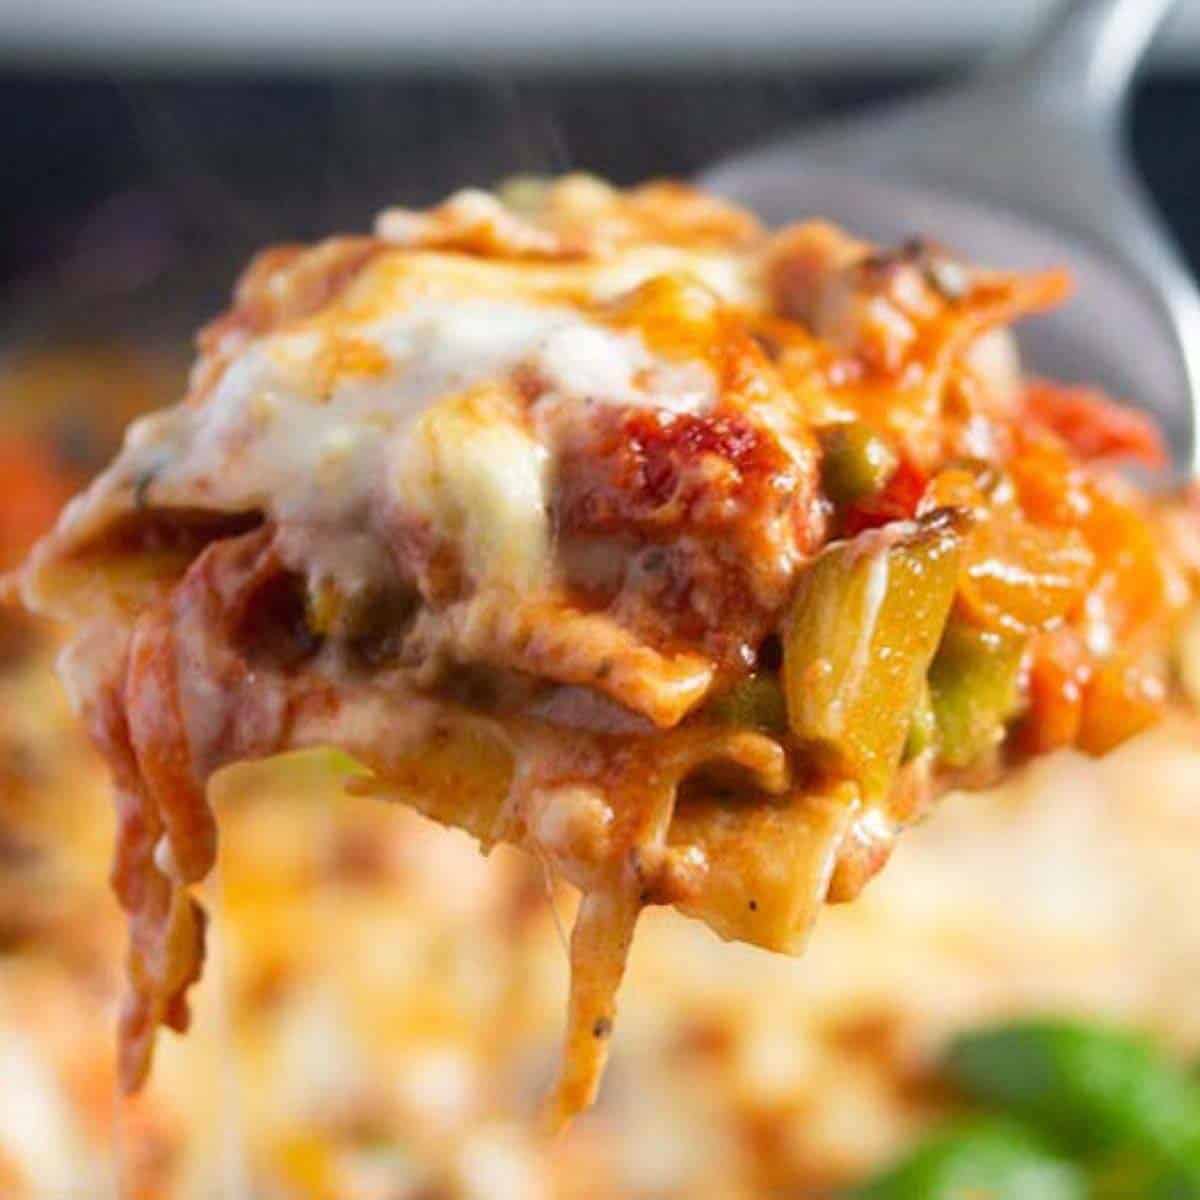 Vegetable Lasagna with White Sauce